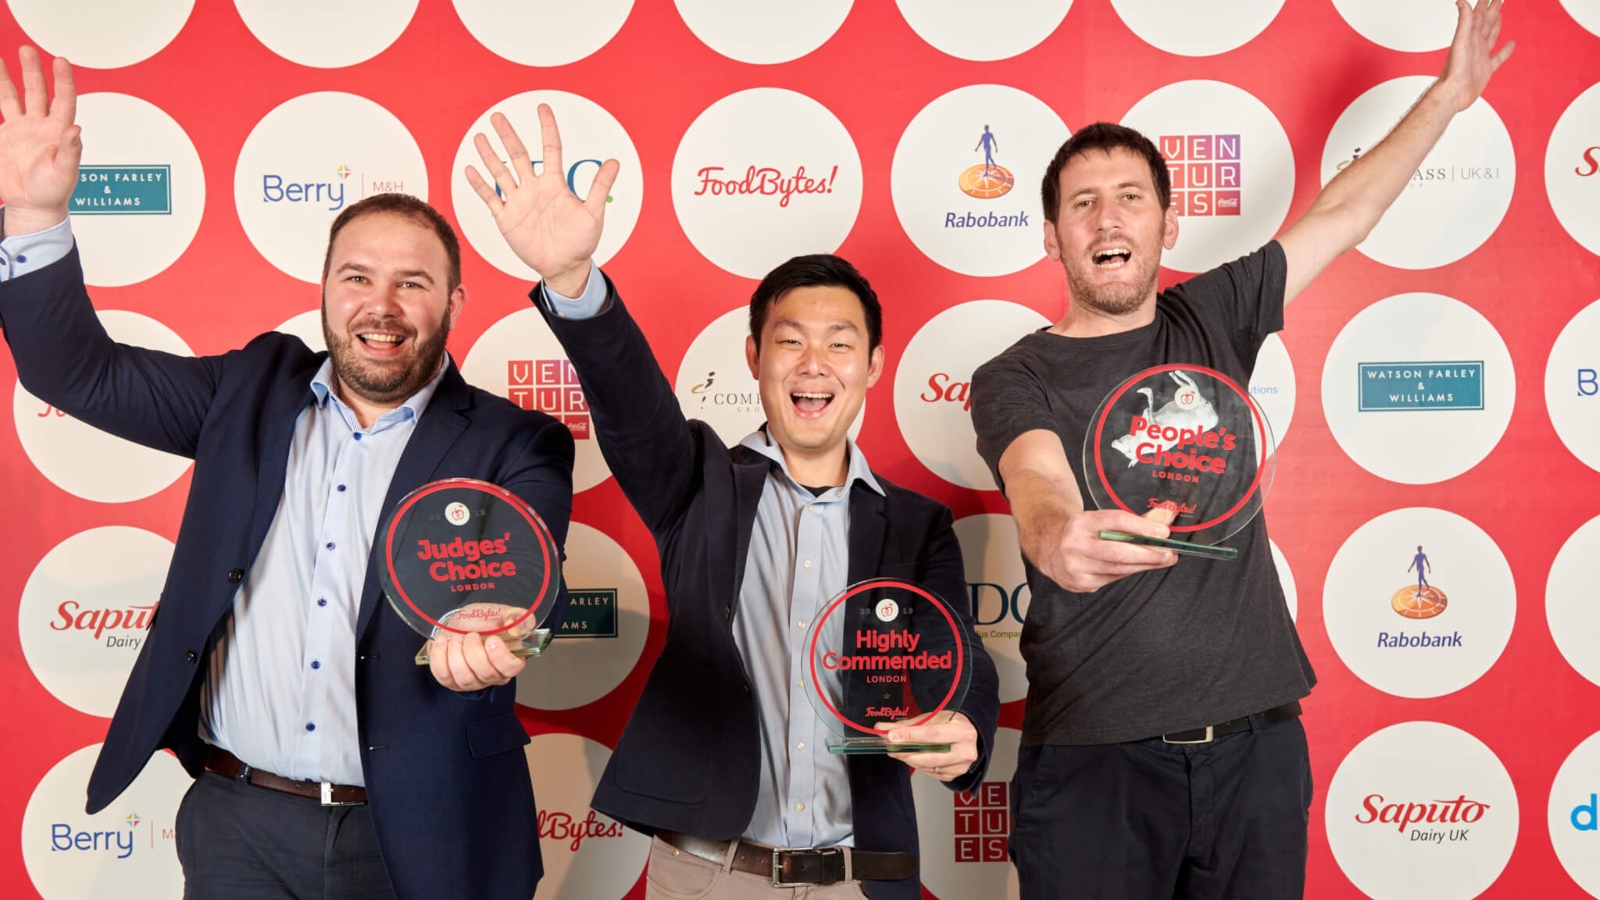 Redefine Meat’s Adam Lahav, right, accepting the People’s Choice Award at Foodbytes in London. Photo: courtesy